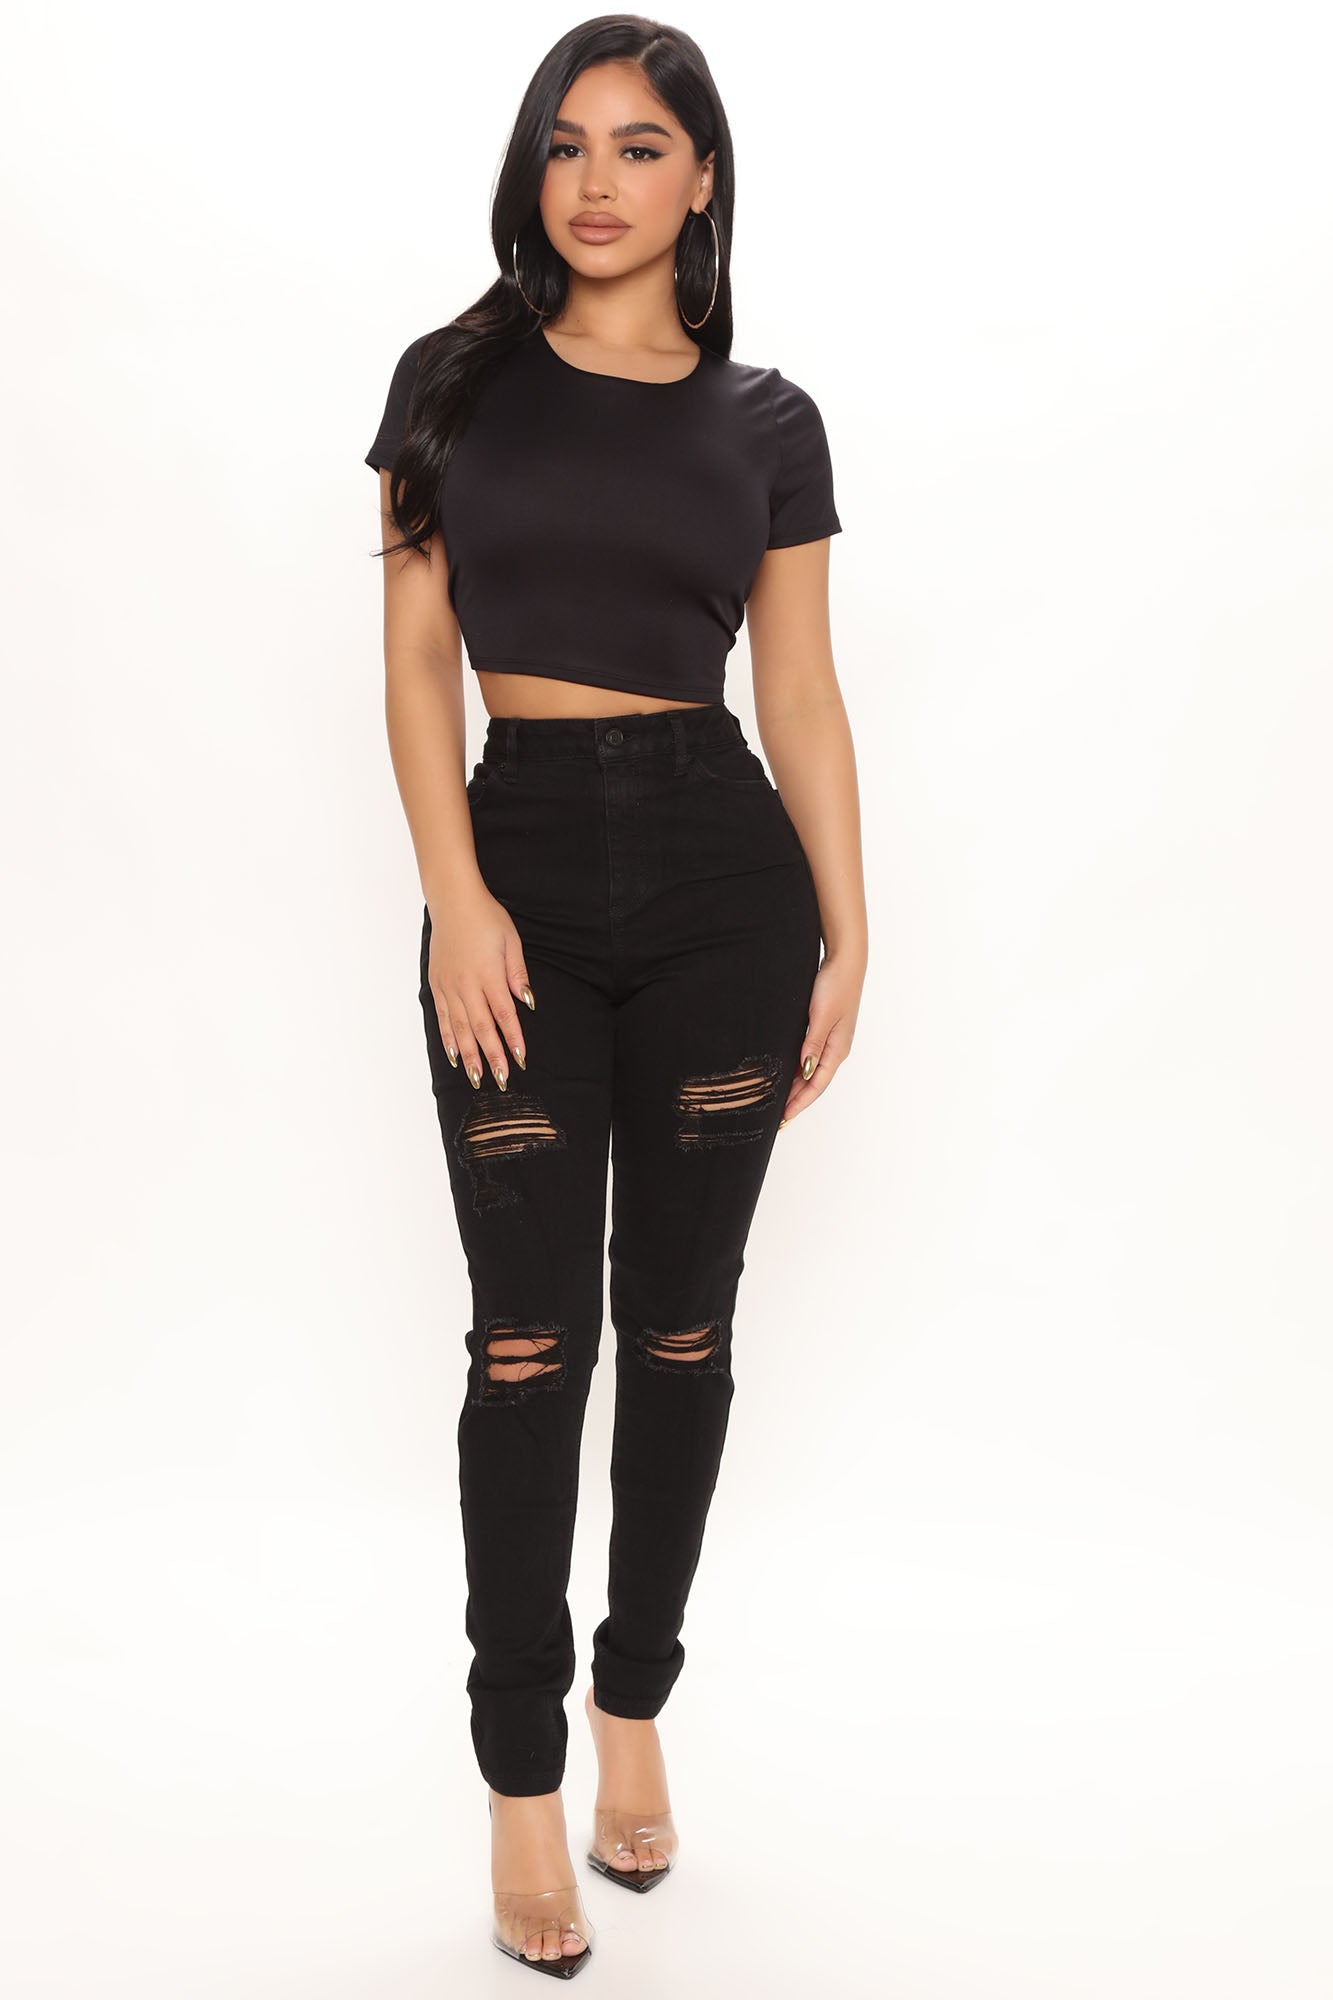 All Wound Up Skinny Jeans - Black